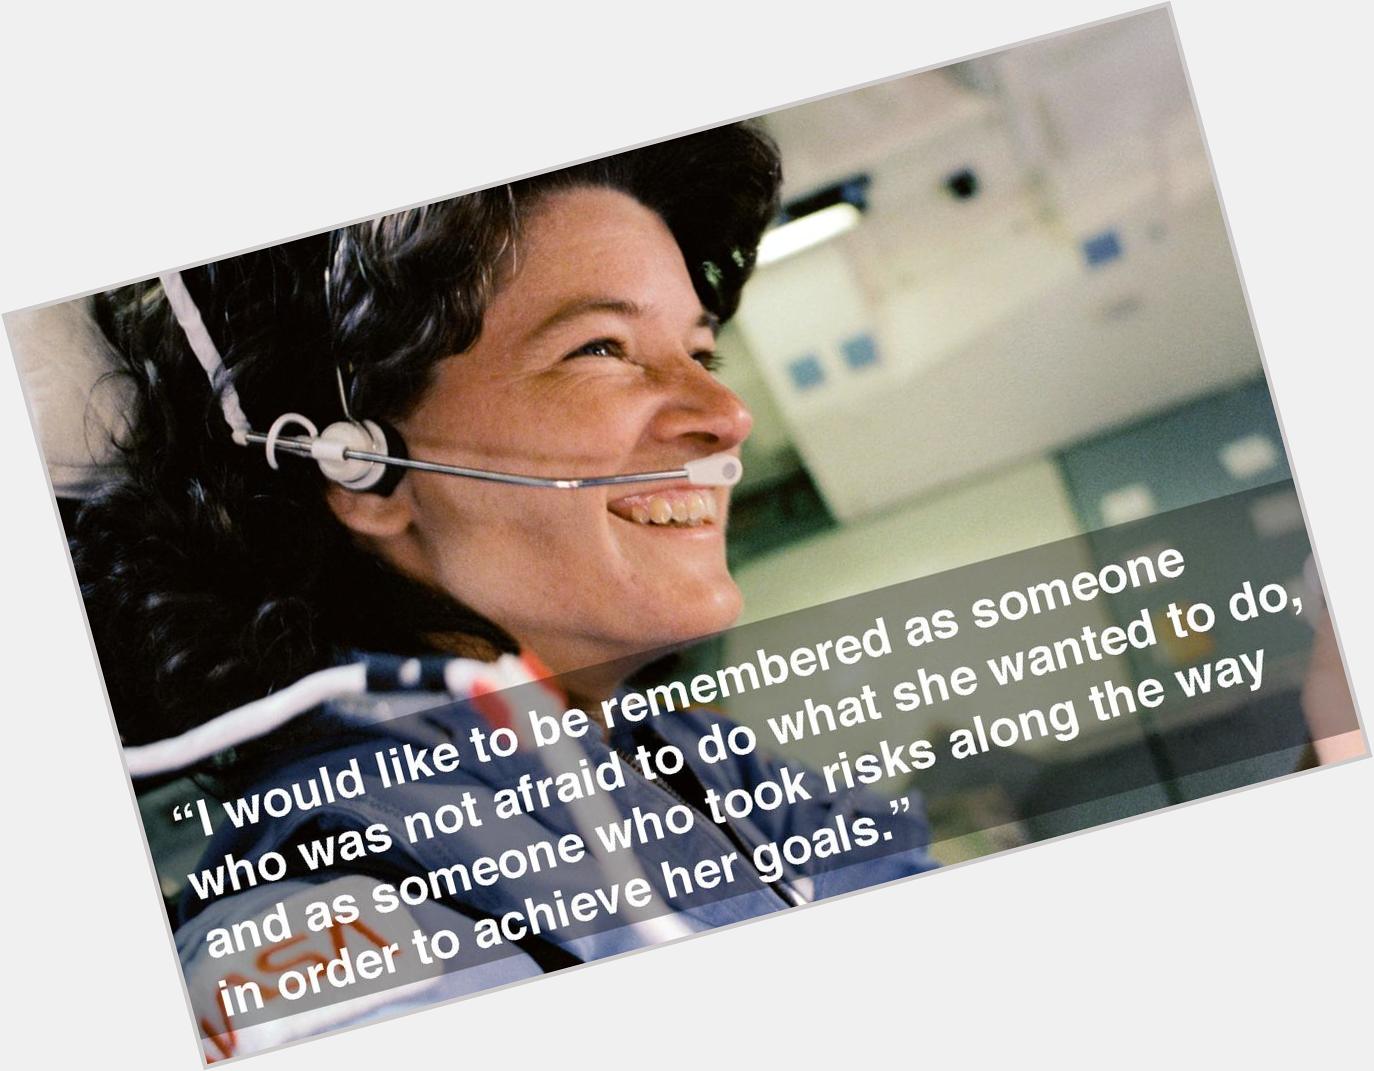 Happy Birthday Sally Ride! At the age of 32, she became the first US woman in space on board the Challenger shuttle. 